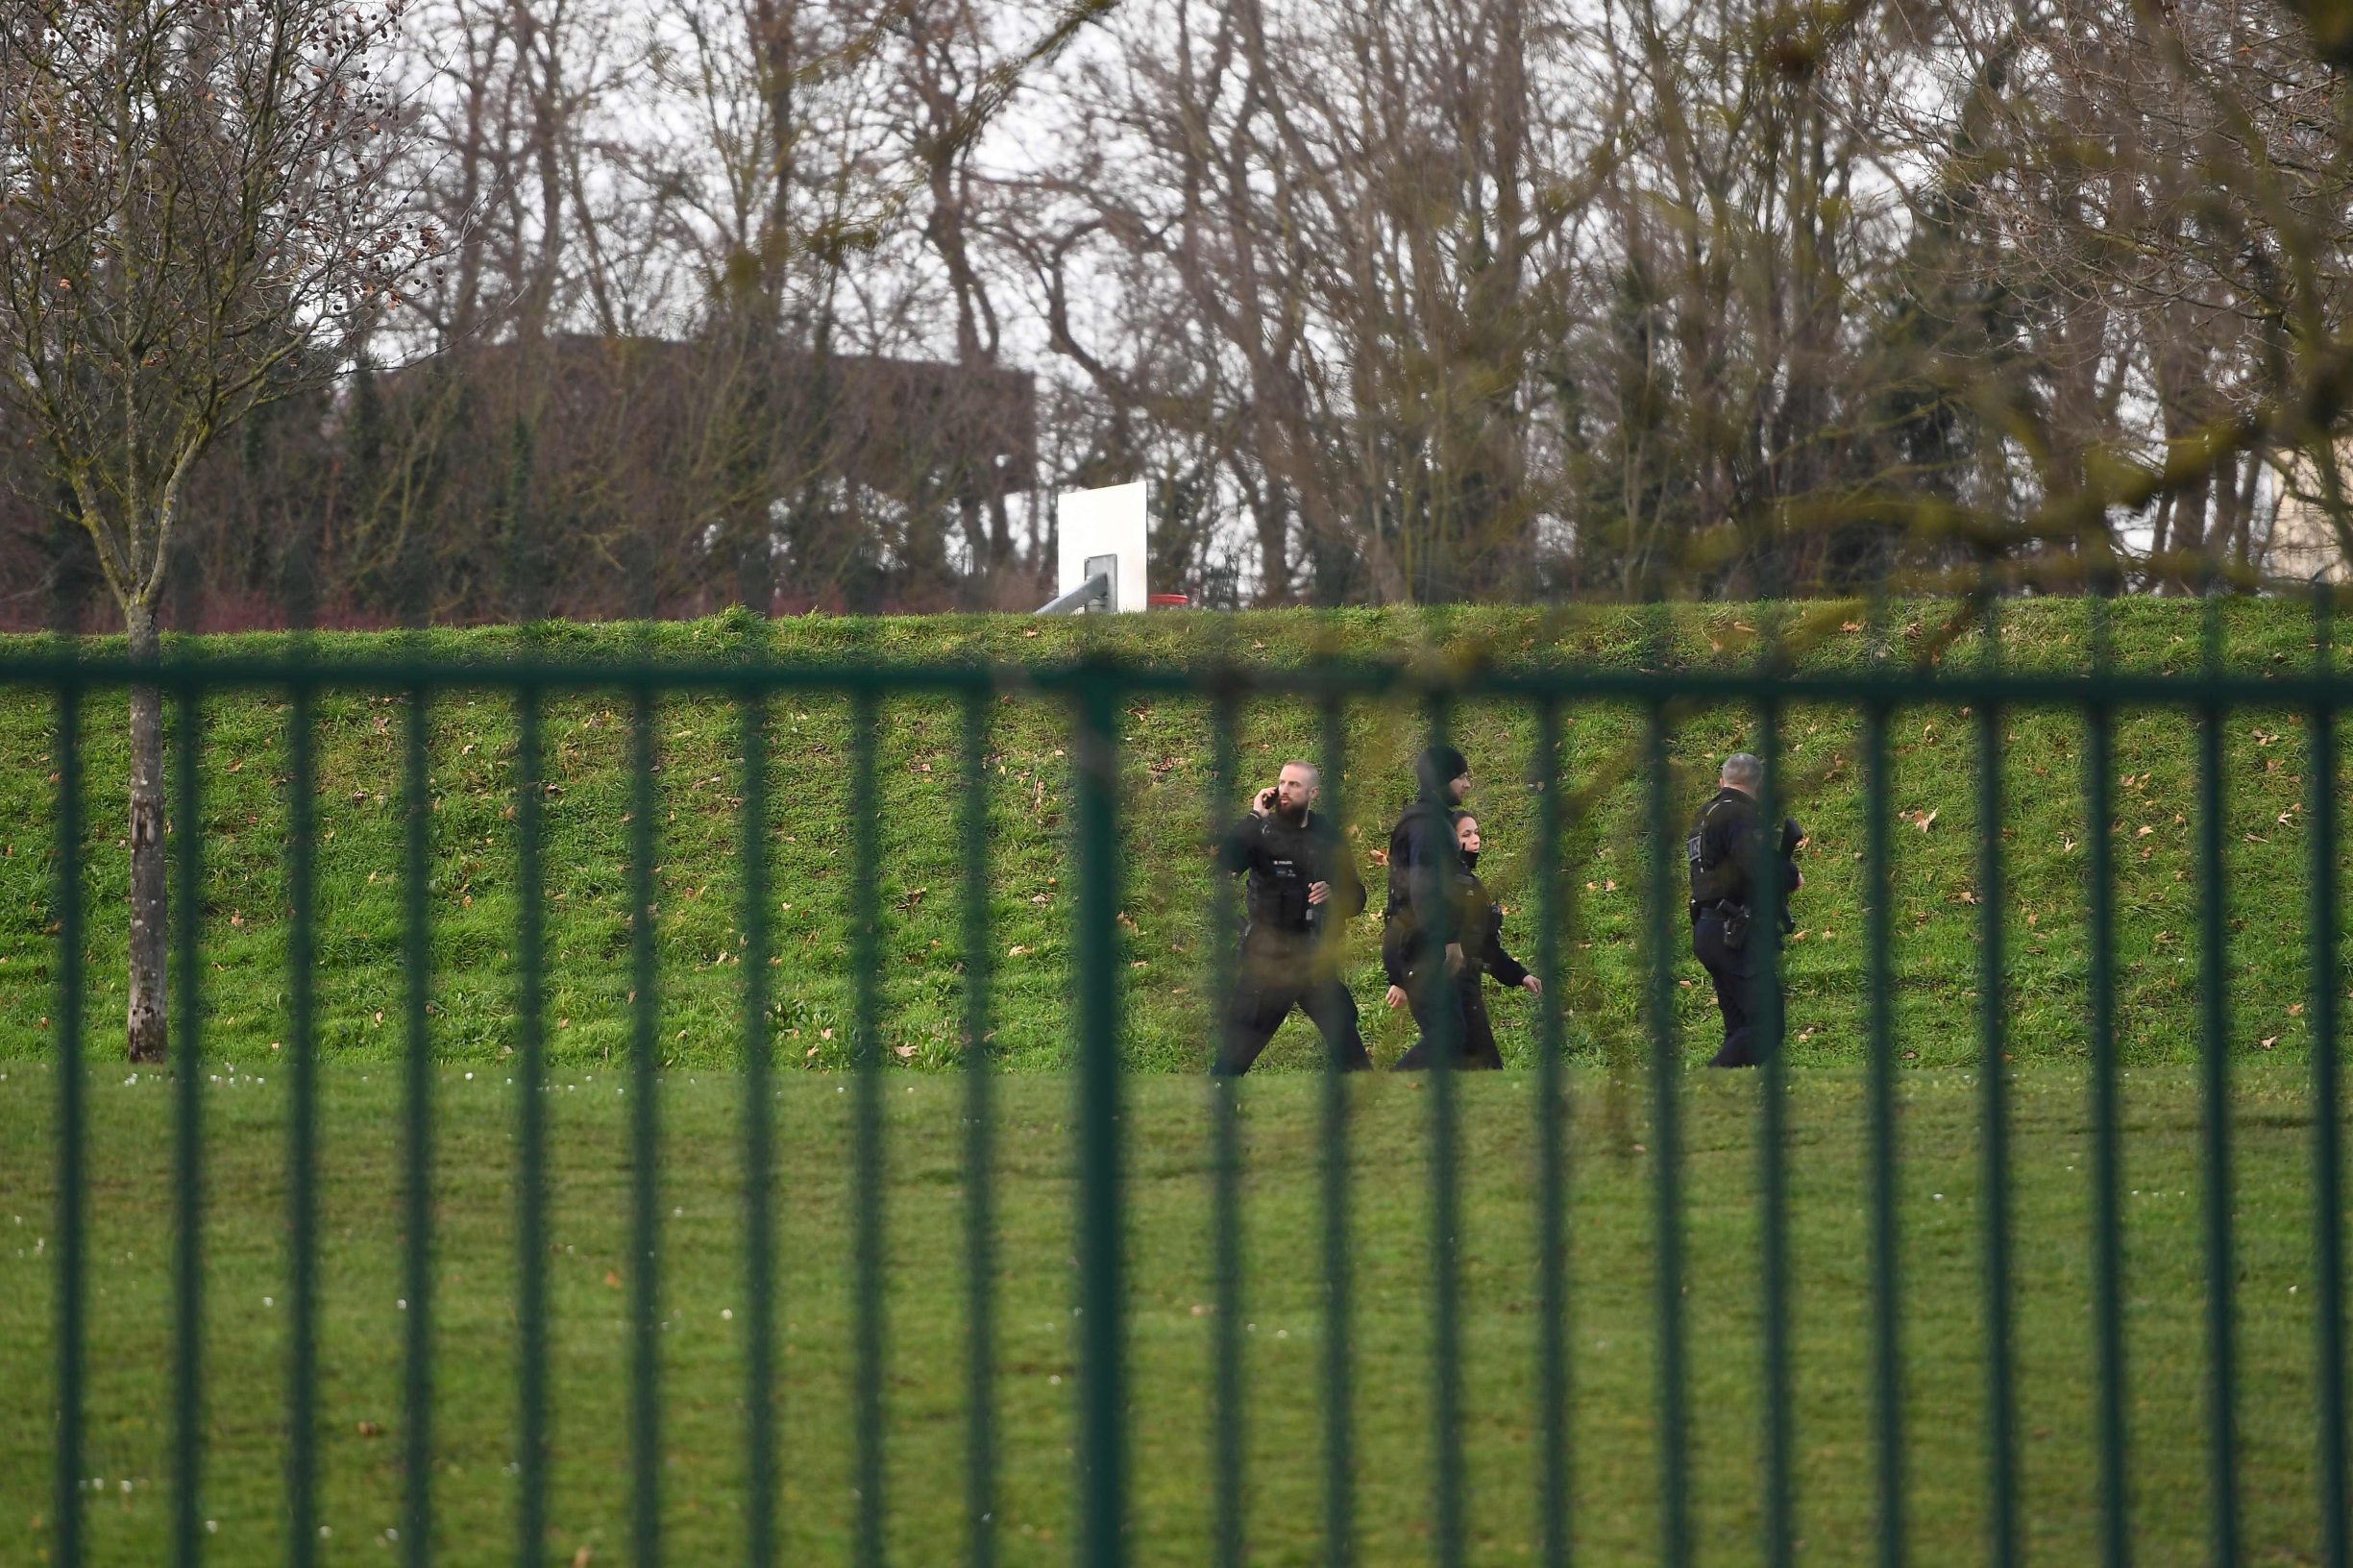 Police officers patrol in a park in the south of Paris' suburban city of Villejuif on January 3, 2020 where a man was shot and killed by officers after stabbing passers-by. - The man had attacked 